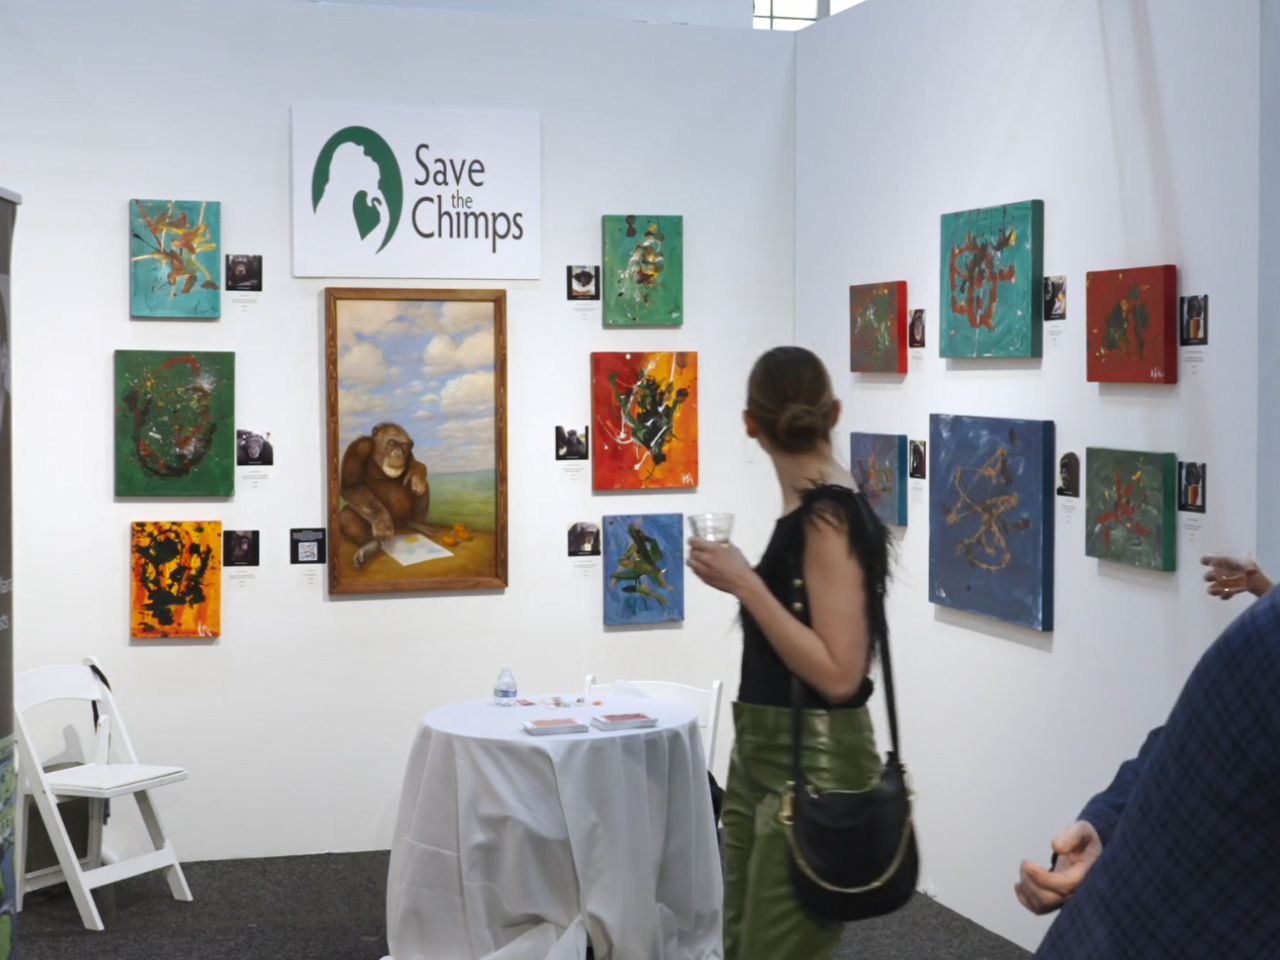 An art display "Save the Chimps" in a gallery. Patrons looking at the art.